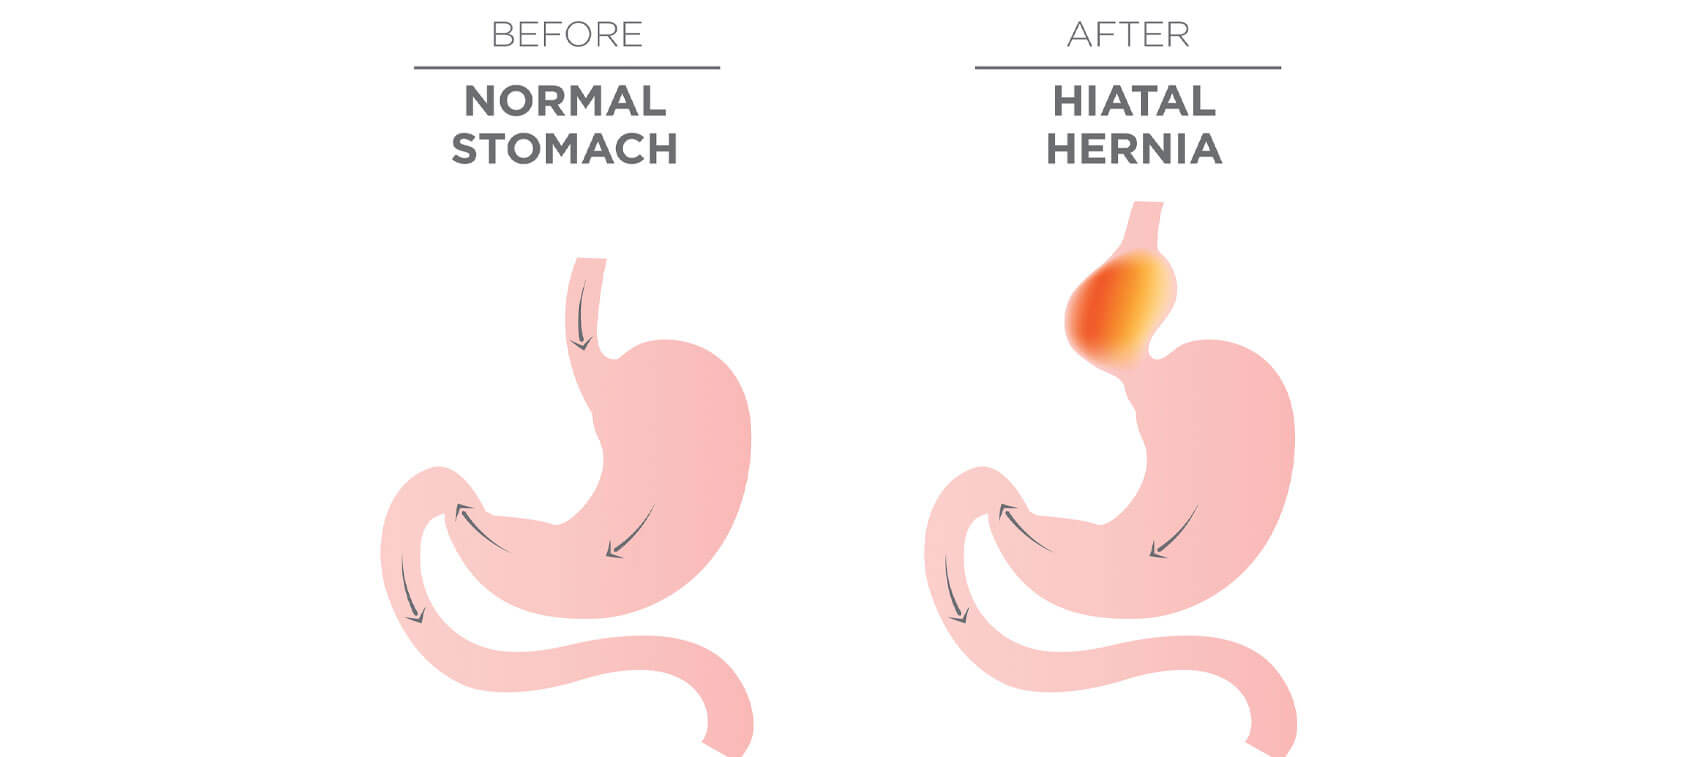 How To Fix A Hiatal Hernia Yourself Dr David Williams